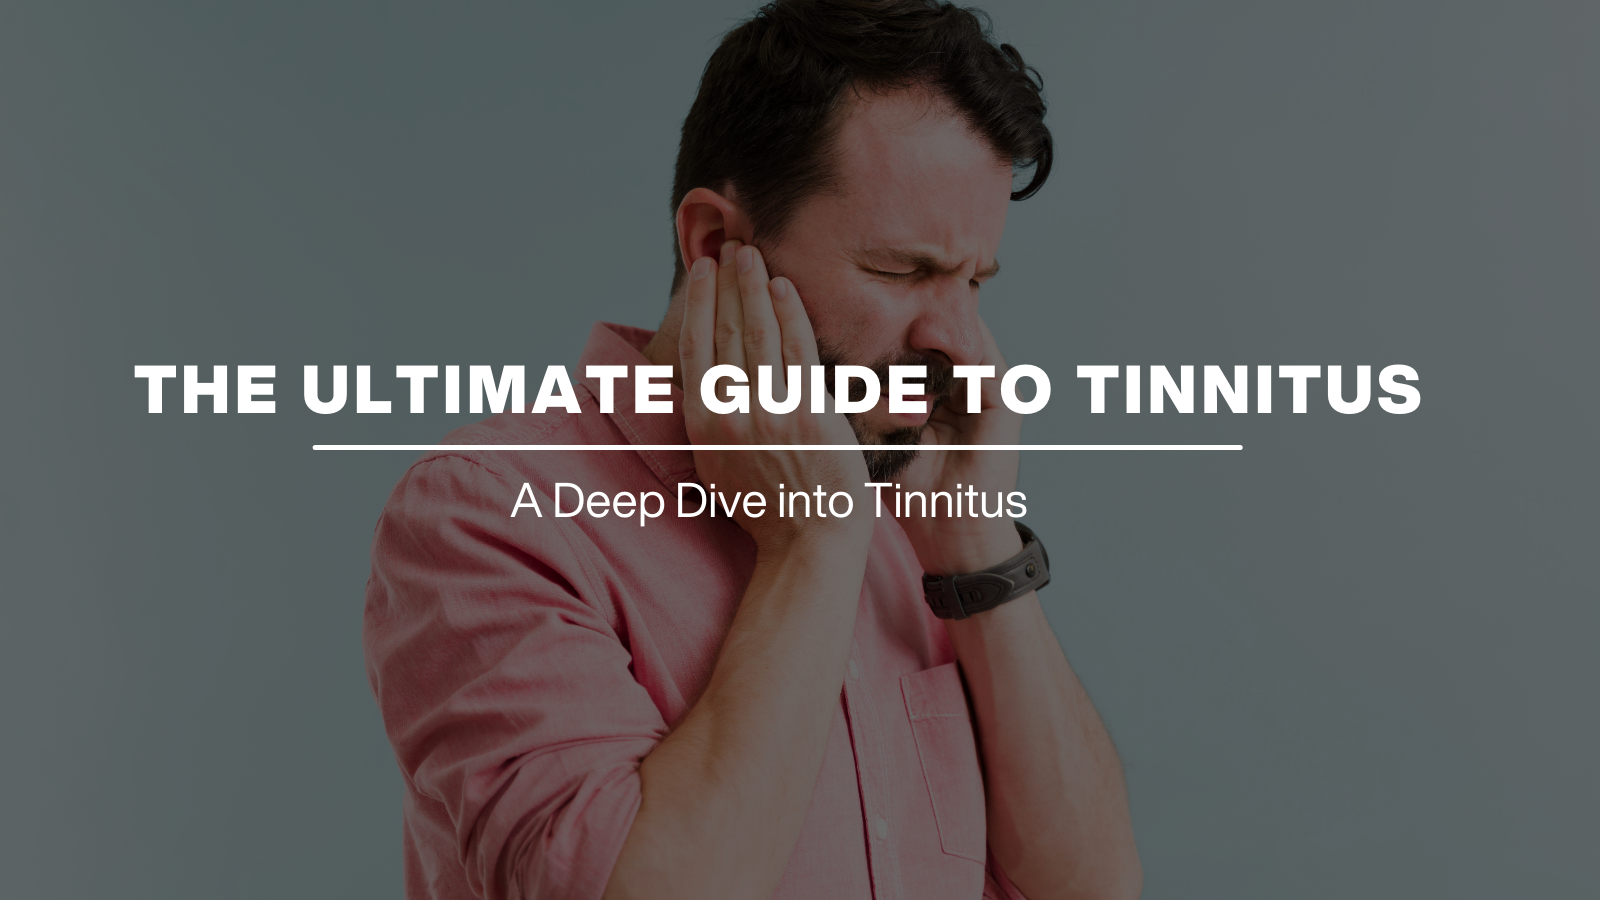 The Ultimate Guide to Tinnitus